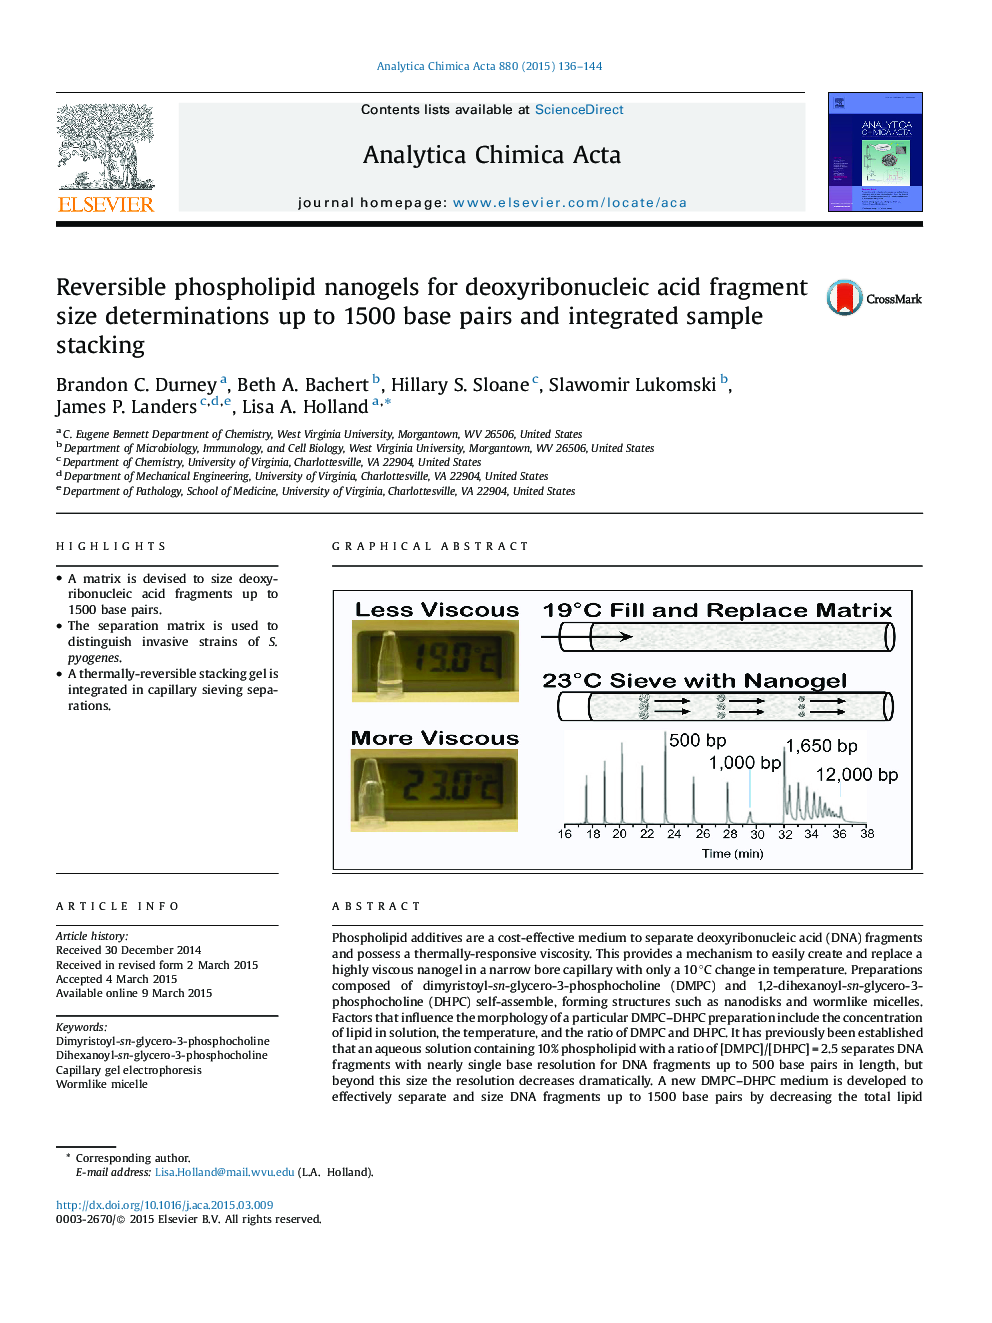 Reversible phospholipid nanogels for deoxyribonucleic acid fragment size determinations up to 1500 base pairs and integrated sample stacking